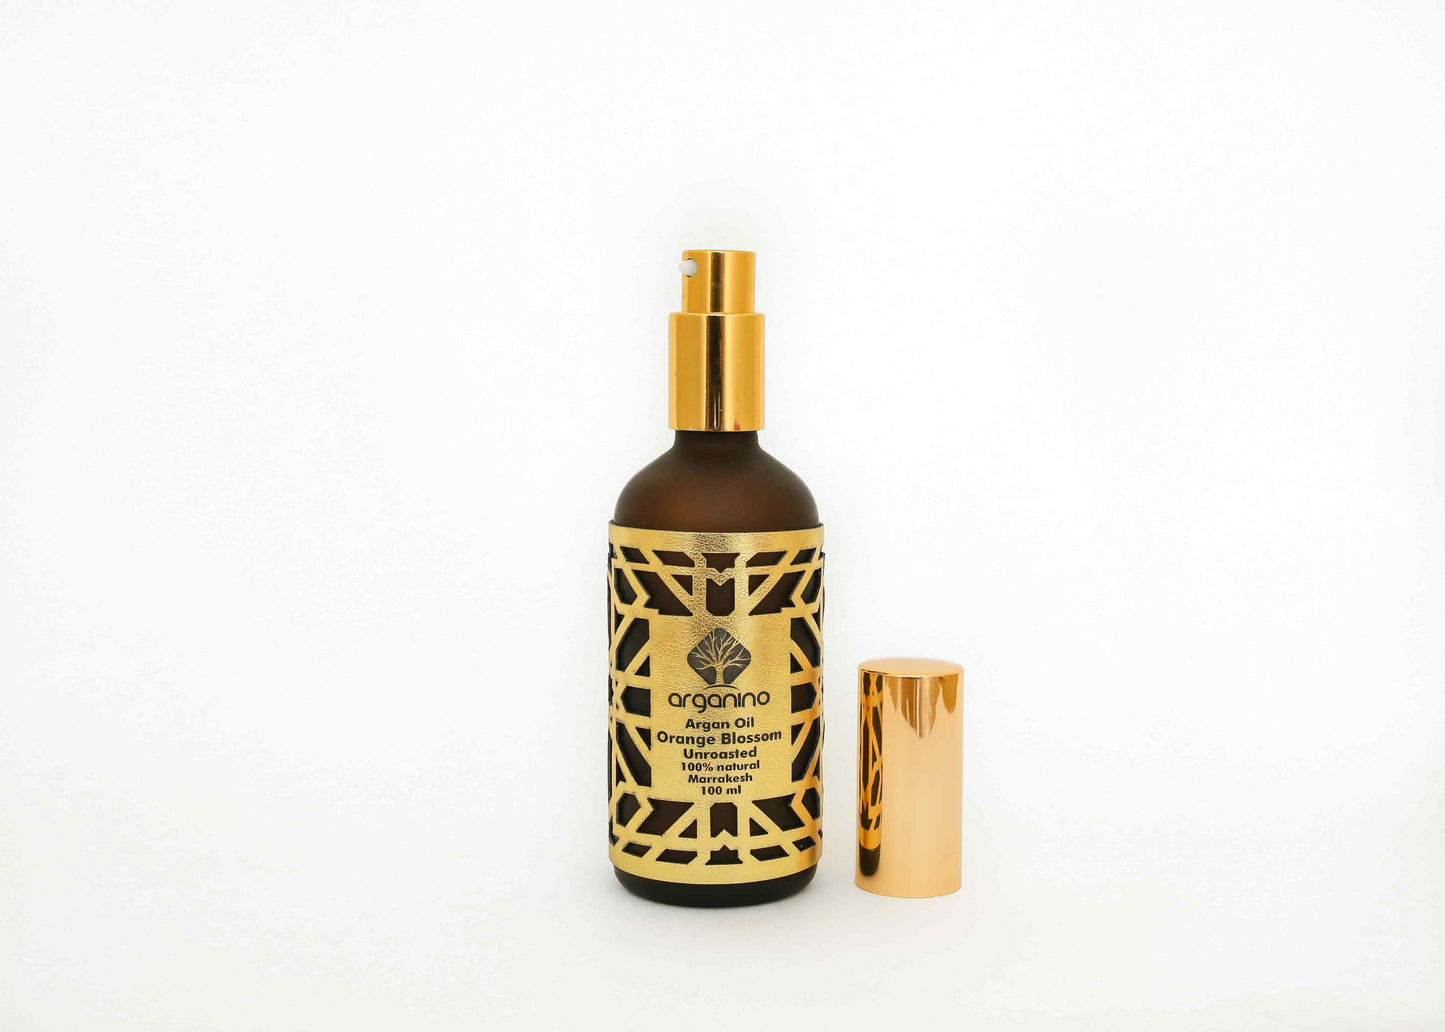 100% Natural Argan oil with Orange Blossom unroasted 100ml. FREE SHIPPING